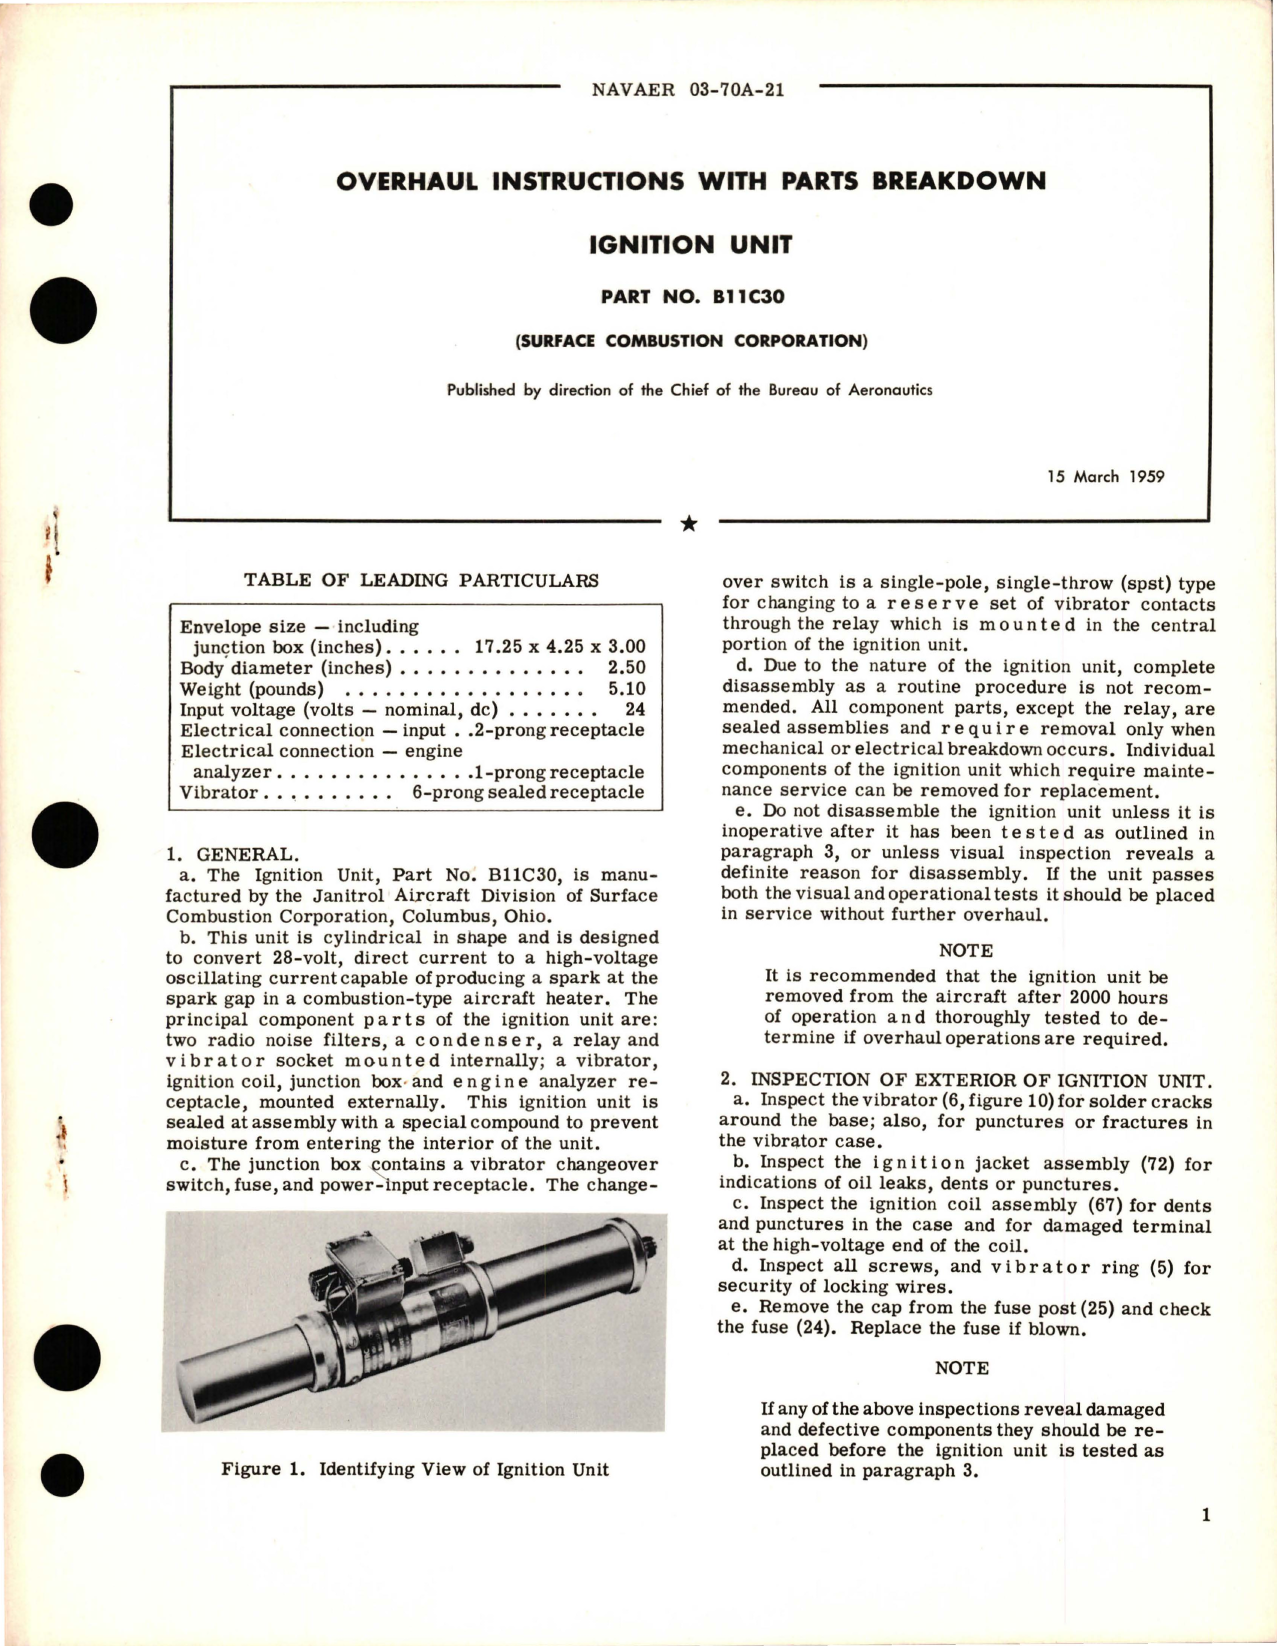 Sample page 1 from AirCorps Library document: Overhaul Instructions with Parts Breakdown for Ignition Unit - Part B11C30 